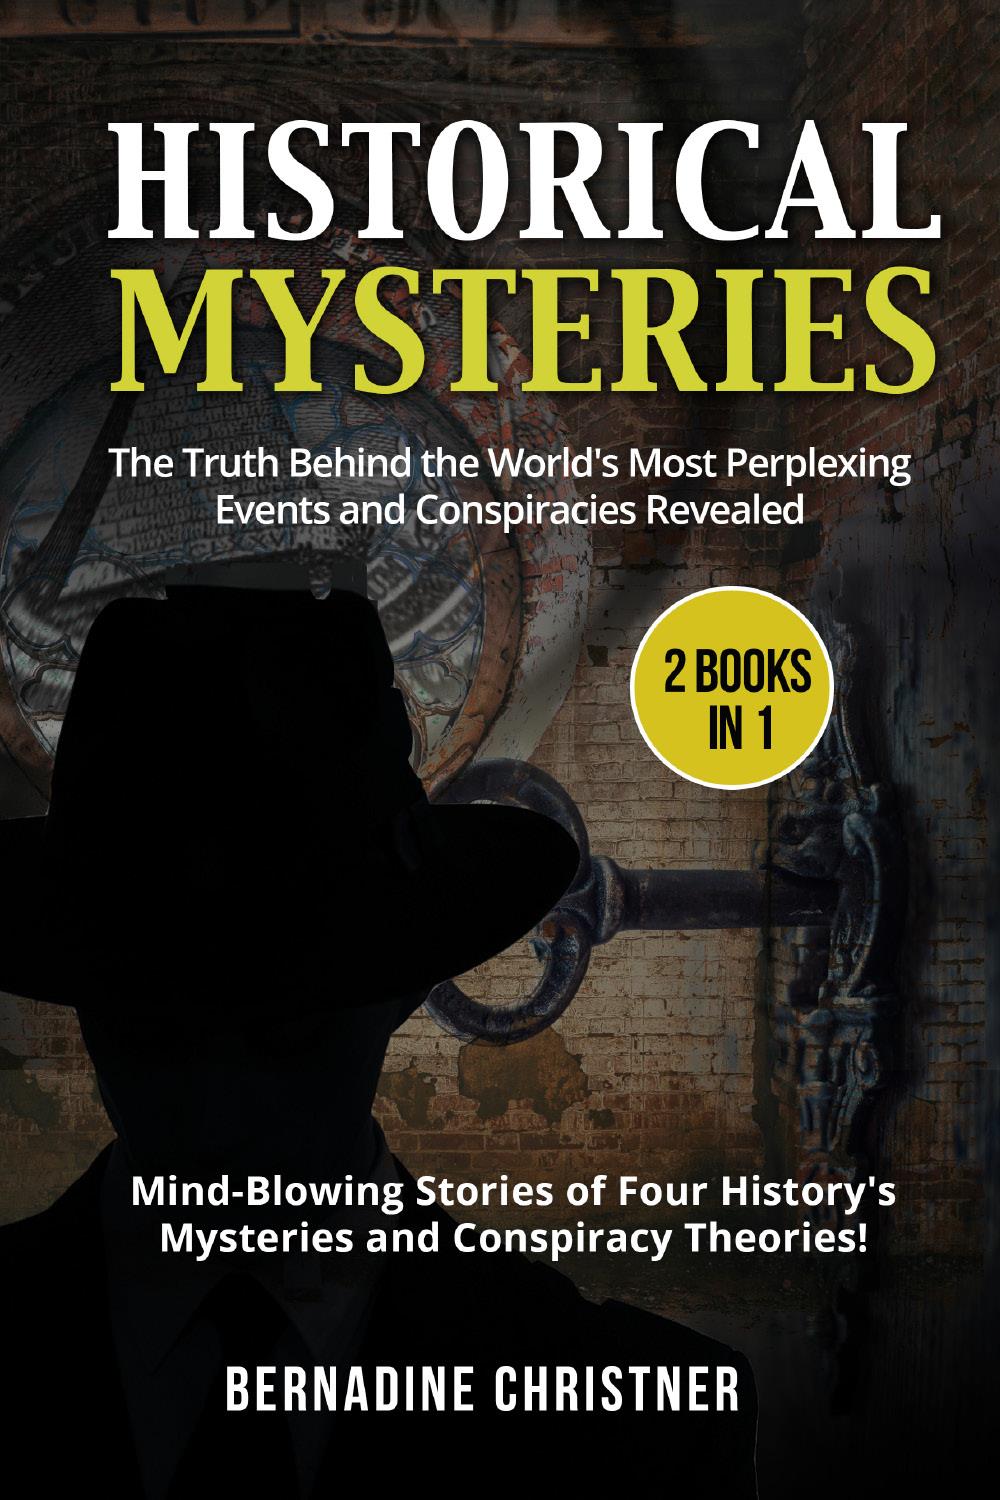 Historical Mysteries (2 Books in 1). The Truth Behind the World's Most Perplexing Events and Conspiracies Revealed – Mind-Blowing Stories of Four History's Mysteries and Conspiracy Theories!